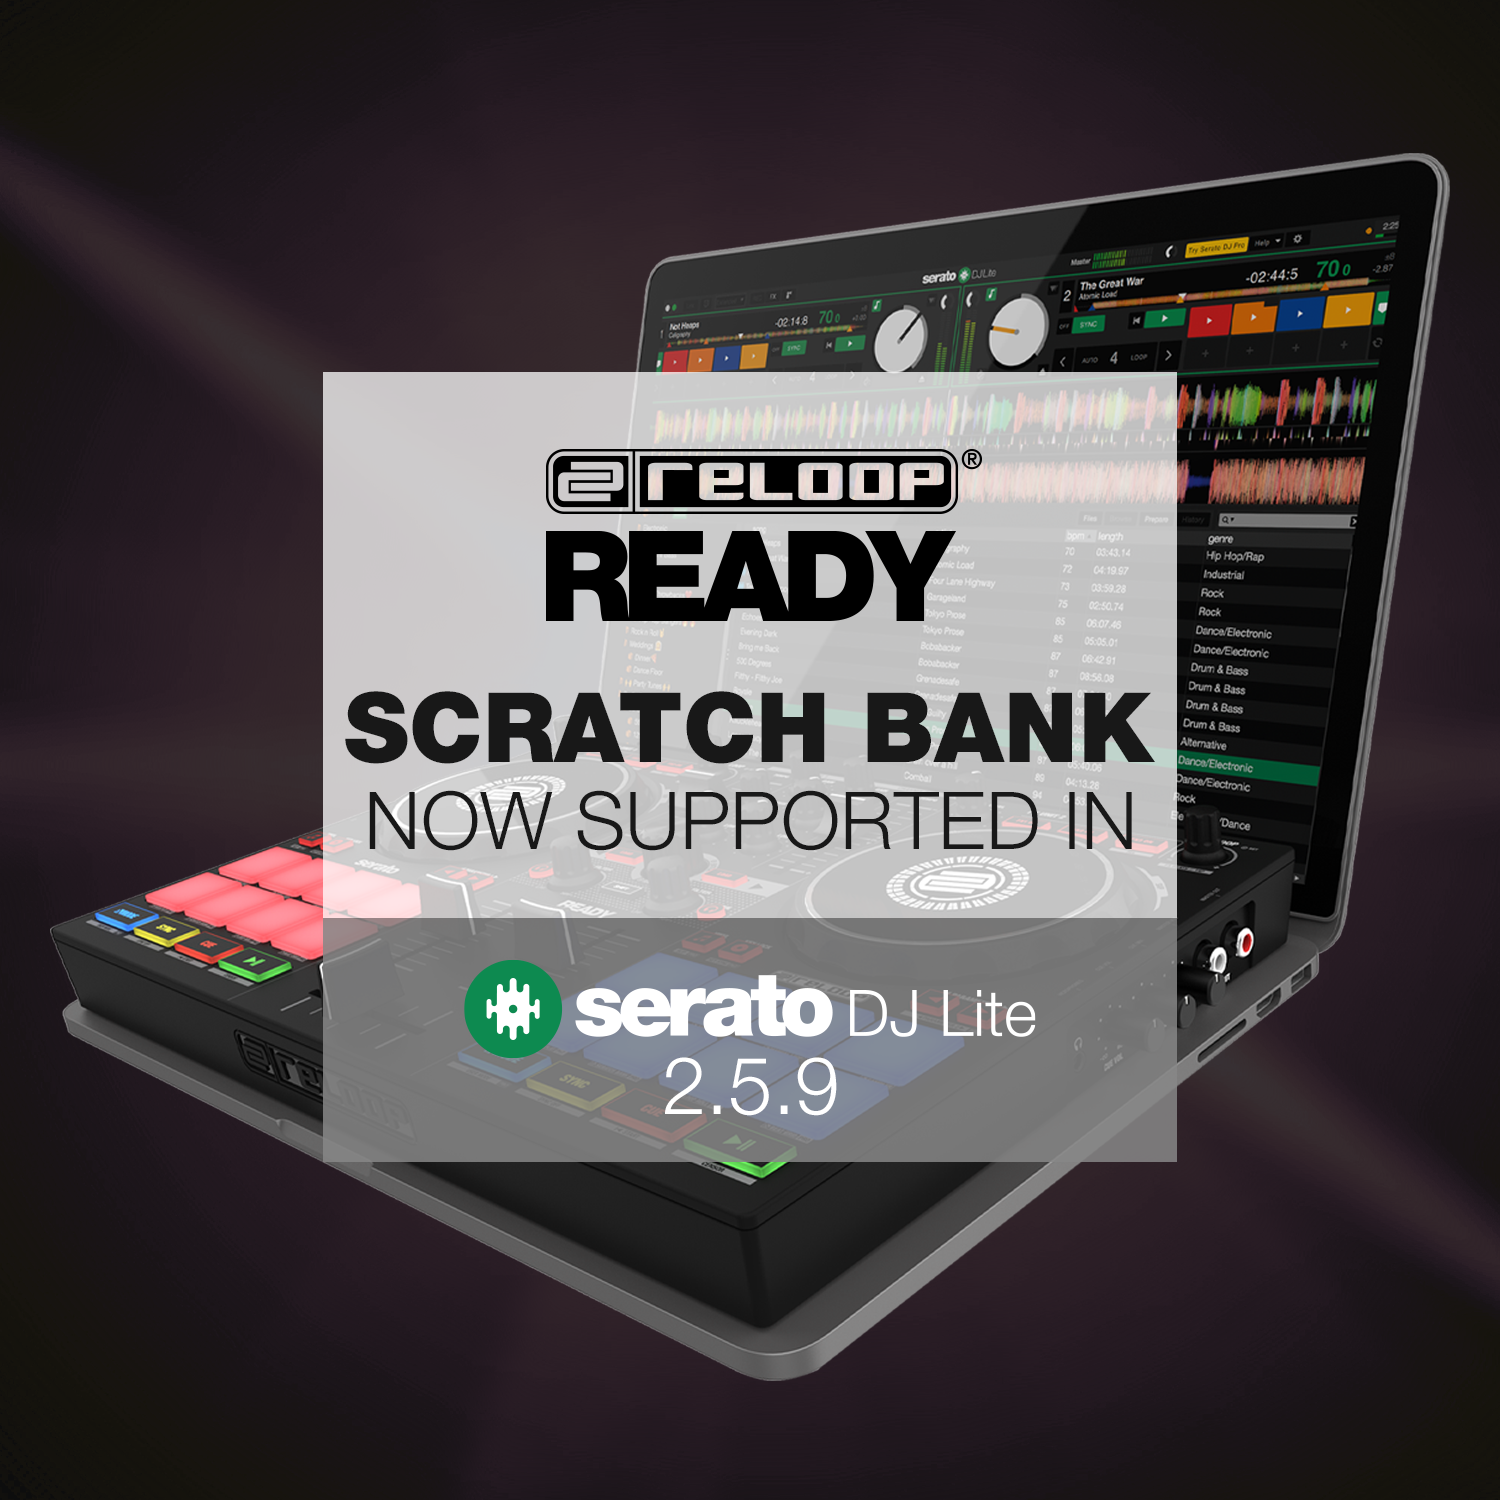 Scratch Bank is now supported in Serato DJ Lite 2.5.9